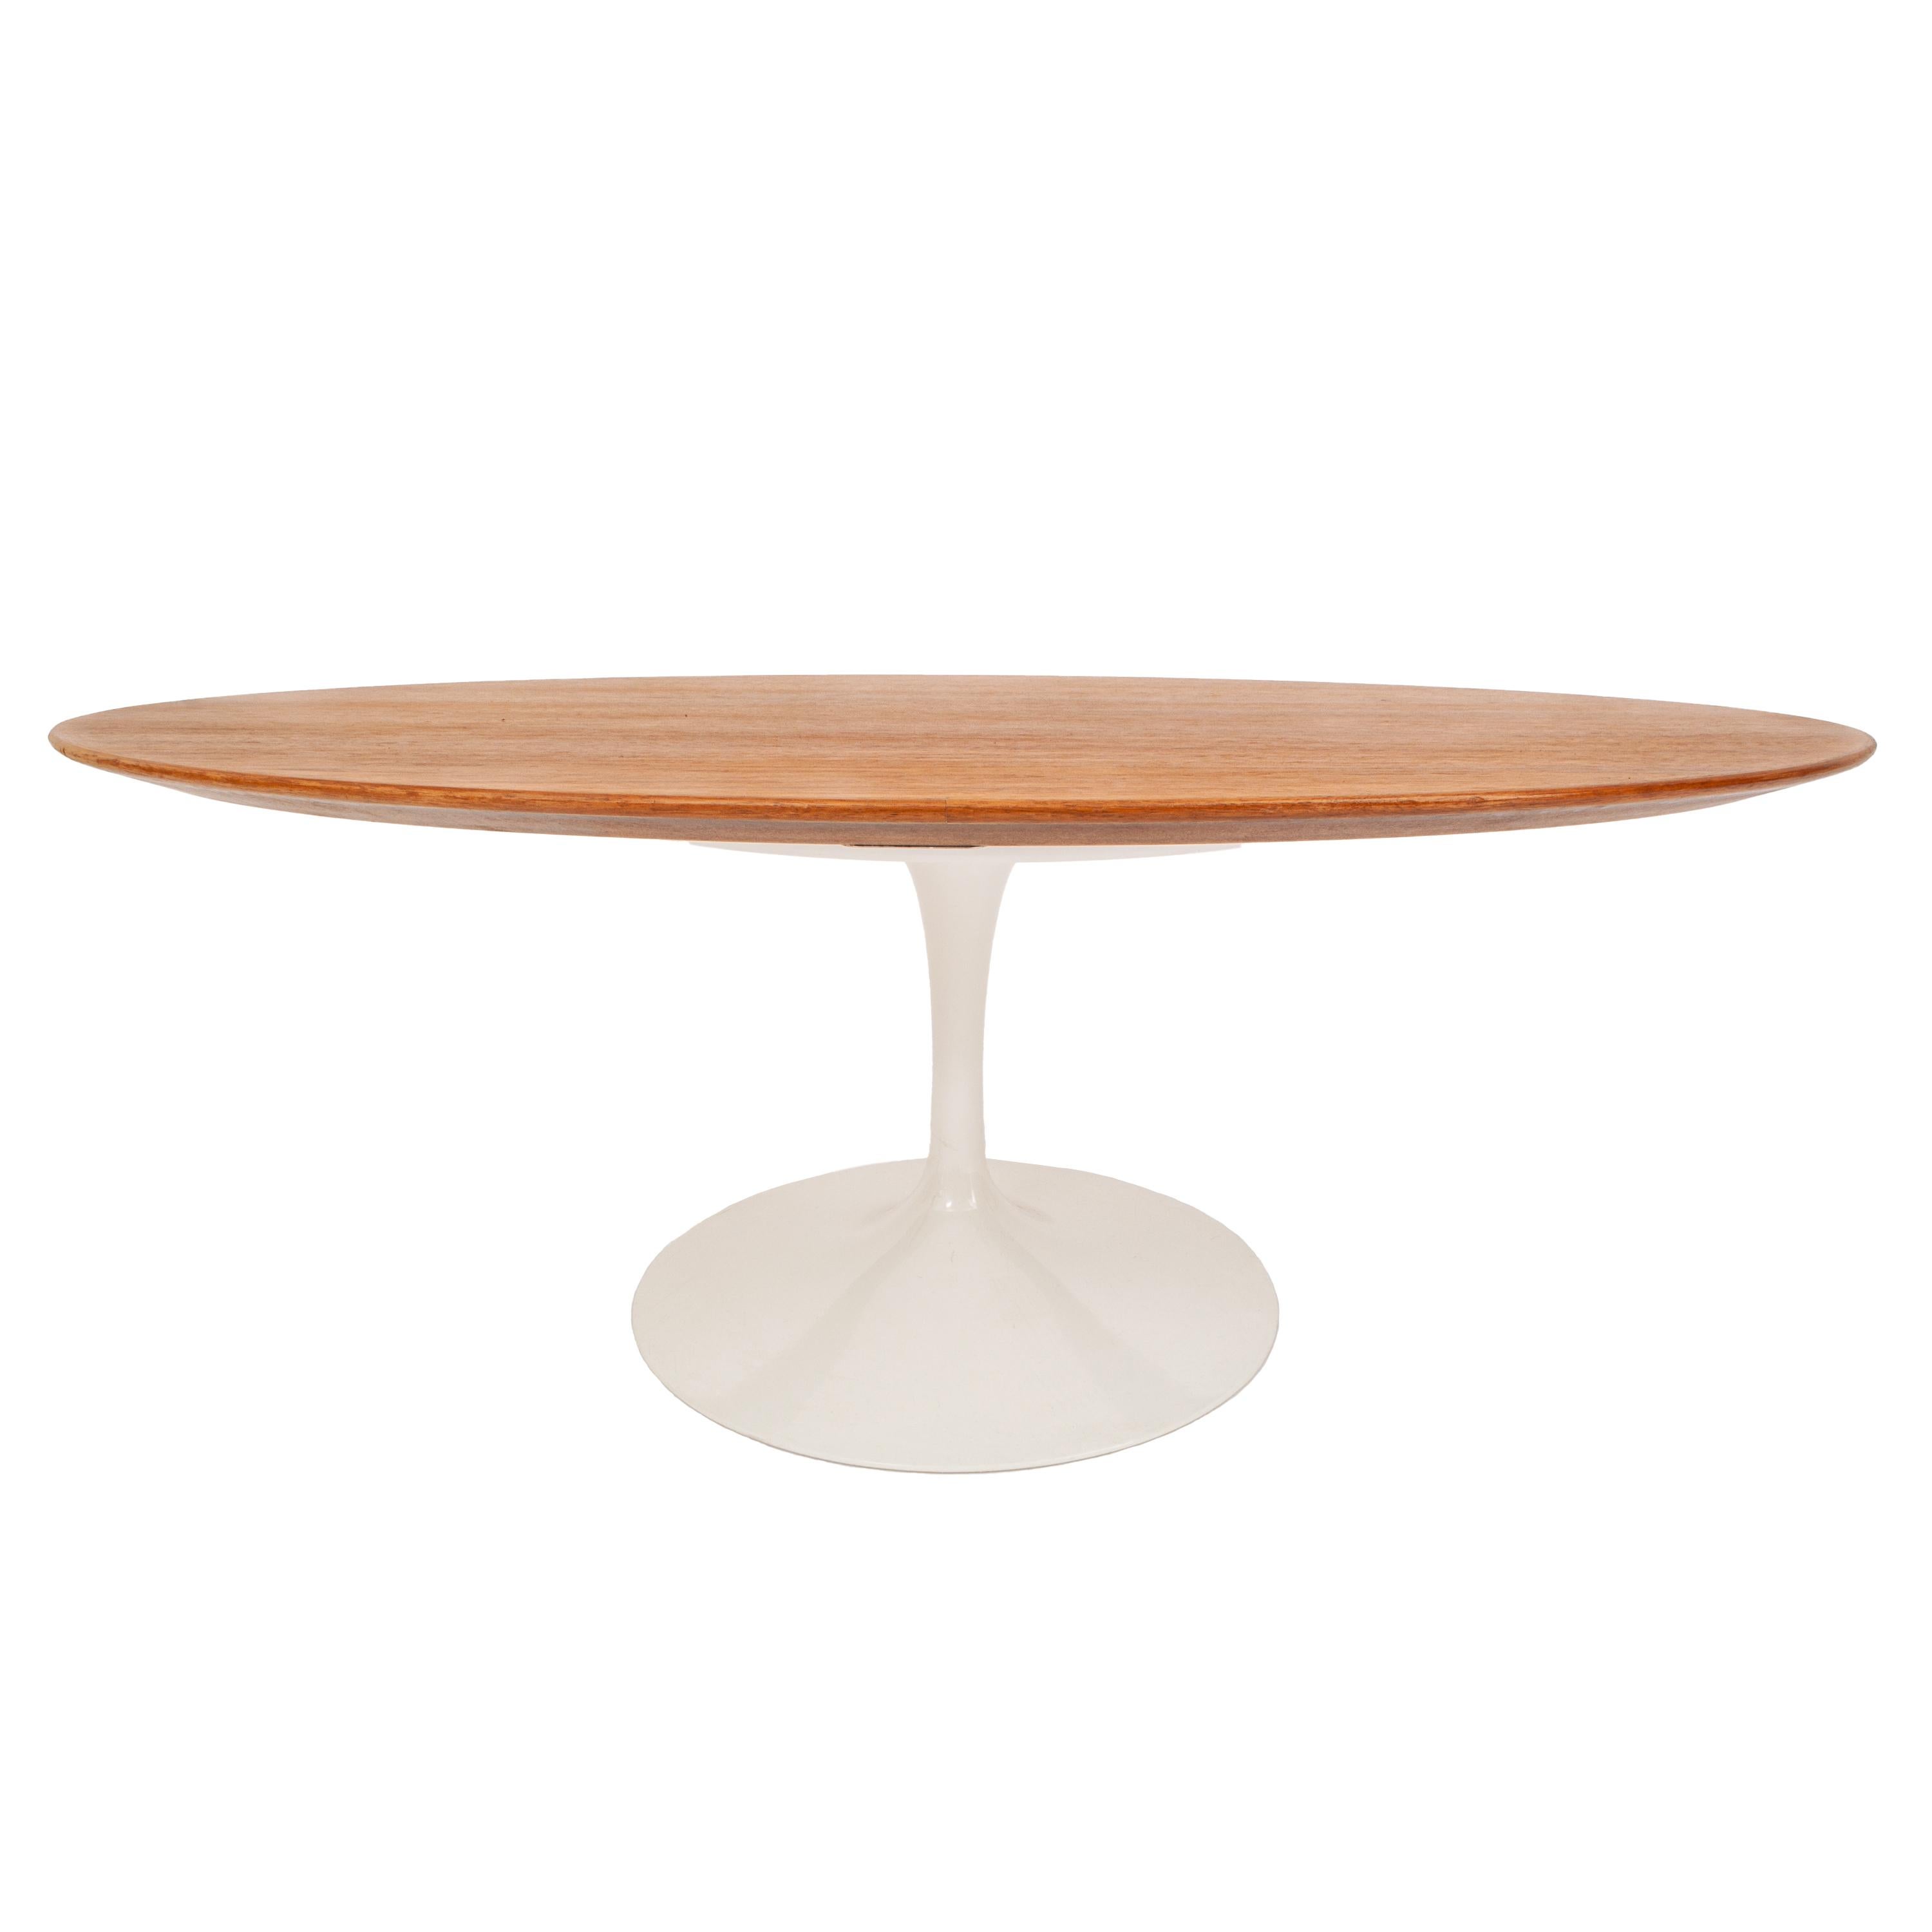 A good original Eero Saarinen for Knoll Studios tulip coffee table and oval walnut top, designed in 1956.
The table having an oval walnut top, the iron powder coated base of typical 'tulip' form, the underside having two Knoll tags both with 